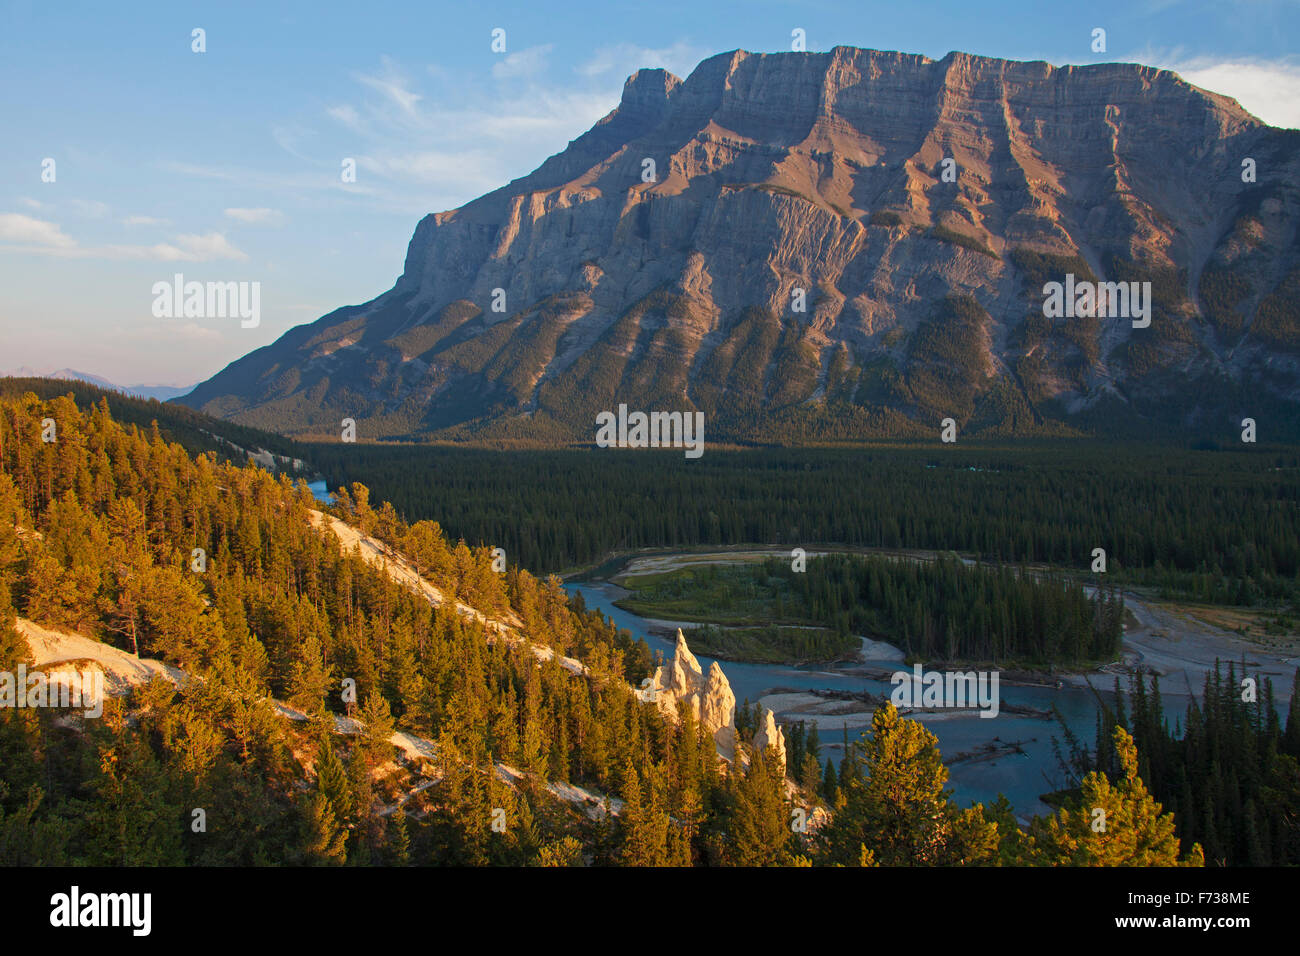 Earth pyramids / Hoodoos in the Bow Valley and Mount Rundle in the Banff National Park, Alberta, Rocky Mountains, Canada Stock Photo